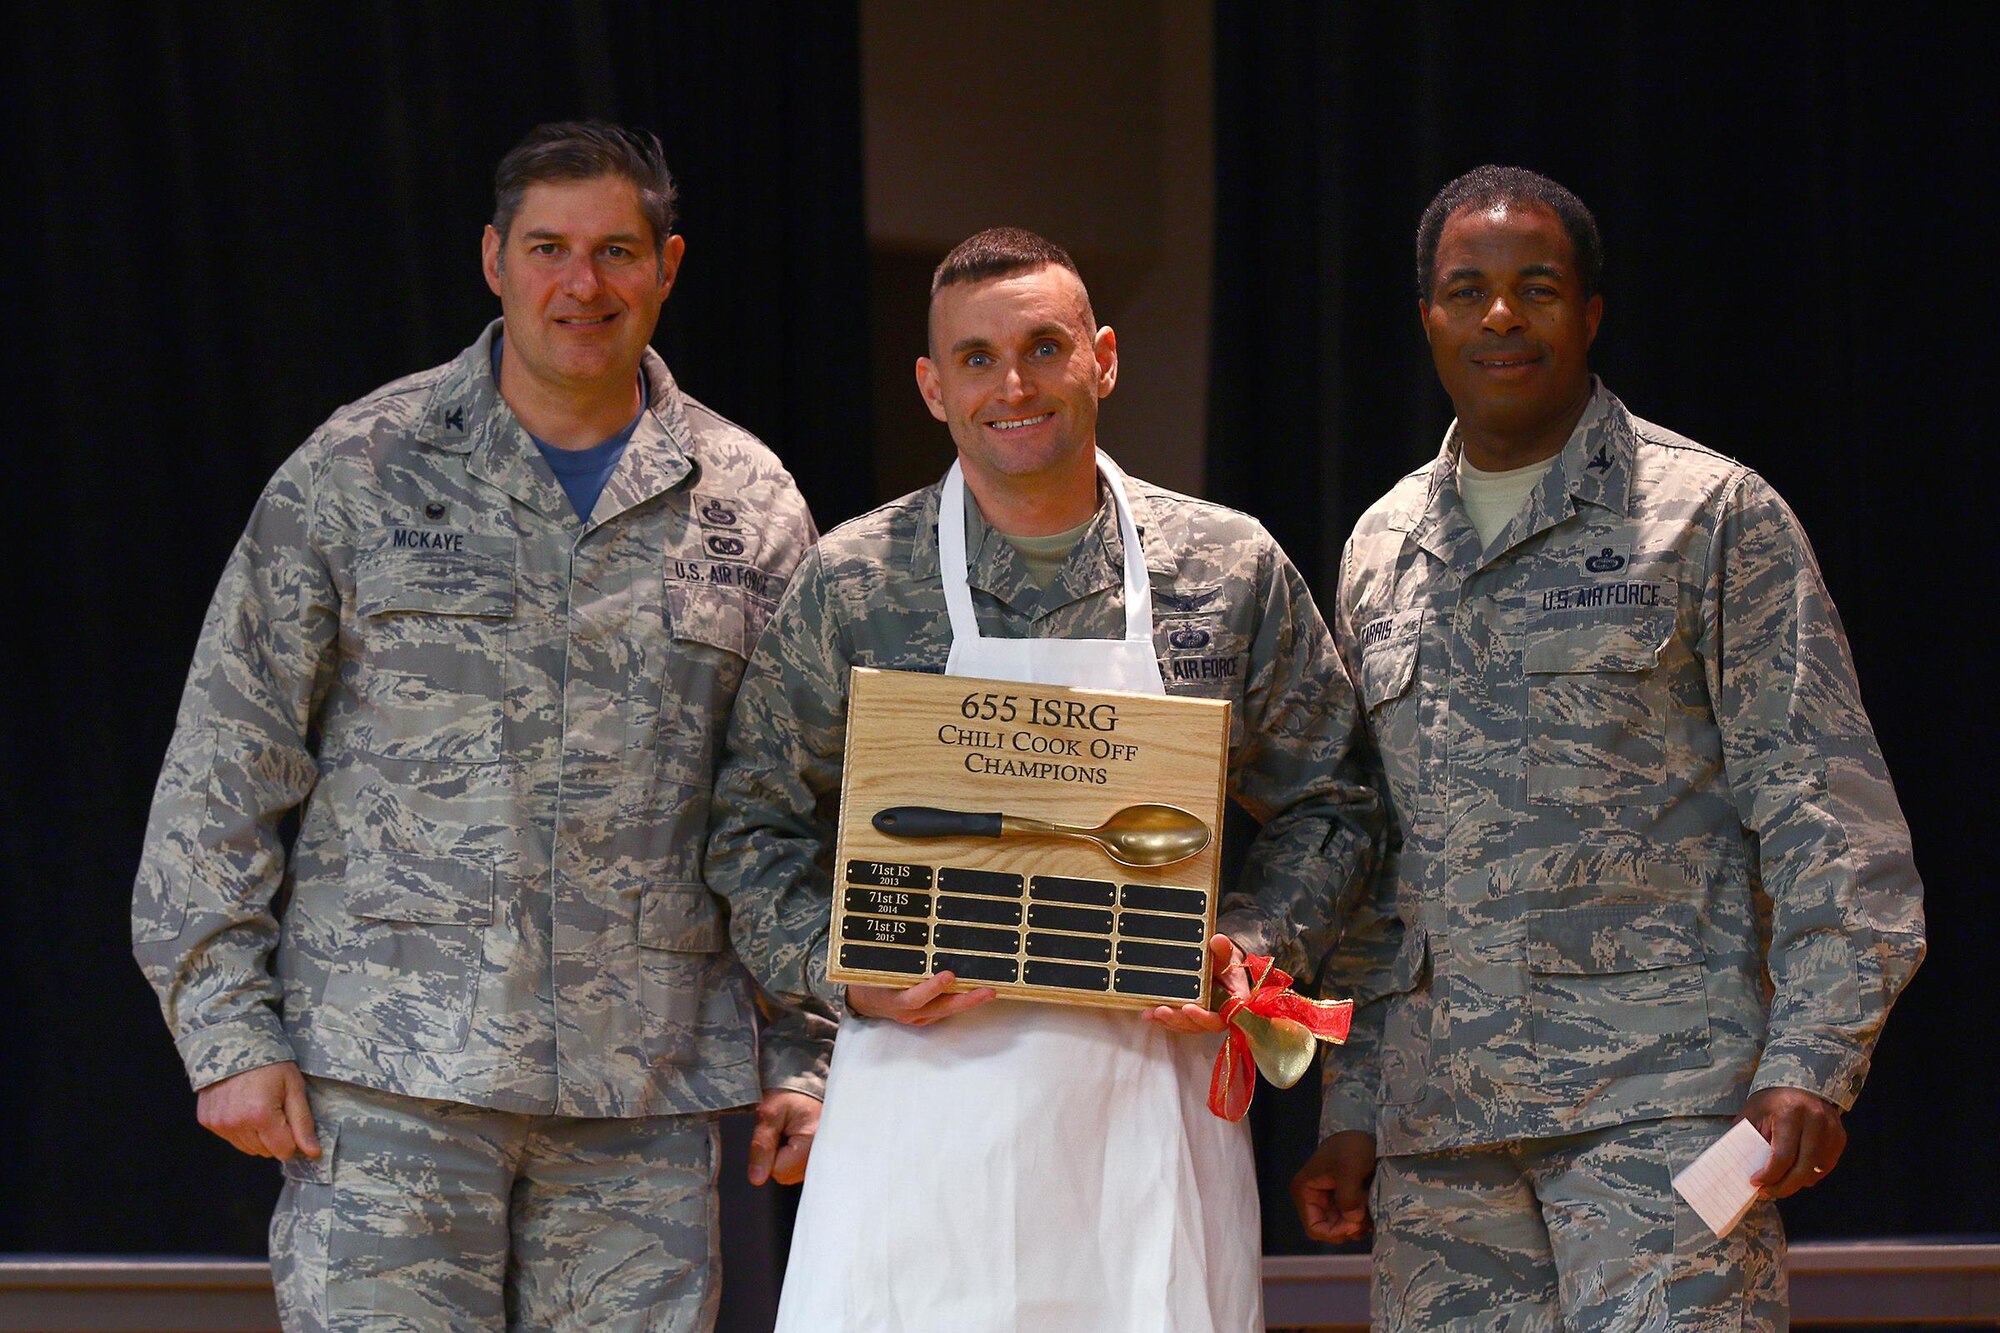 Capt. James Spindler, 64th Intelligence Squadron, is the winner of the 2016 655th Intelligence, Surveillance and Reconnaissance Group Chili Cook-Off at the USO here Nov. 19, 2016. The captain received his apron award from Col. John D. McKaye, 655th ISRG commander (left) and Col. Lonnie Garris, III, 655th ISRG deputy commander. Capt. Spindler’s chili won in the ‘Best Overall’ category. The other three categories judged were: spiciest, white chili and most creative. (U.S. Air Force photo /Tech. Sgt. Patrick O’Reilly)